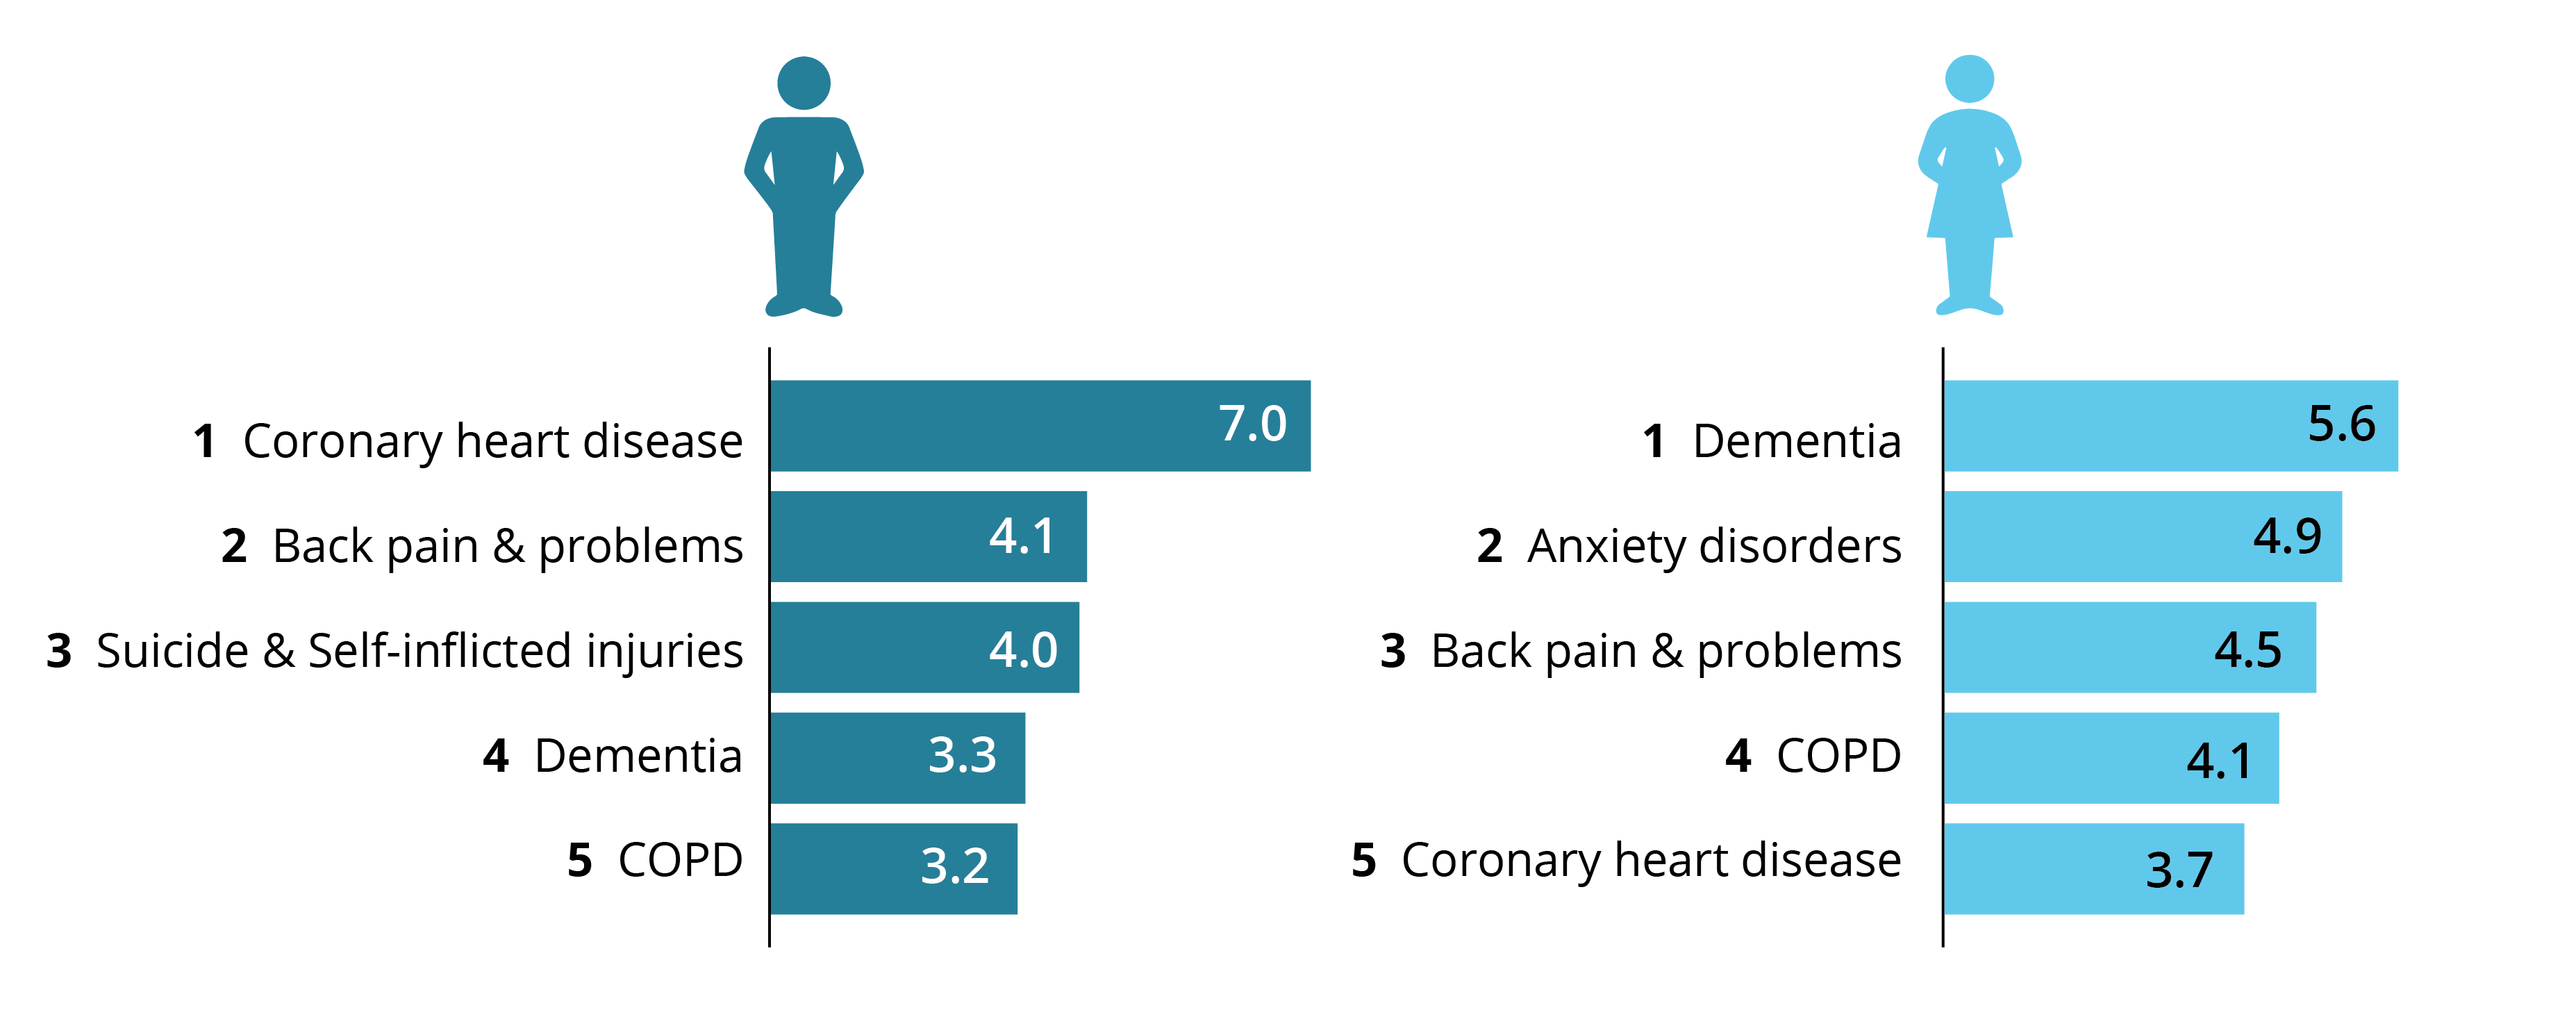 Top-5 causes for Men: 1. Coronary heart disease, 2. Back pain & problems, 3. Suicide & self-inflicted injuries, 4. Dementia, 5 COPD. For women: 1. Dementia, 2. Anxiety disorders, 3. Bac pain & problems, 4. COPD, 5. Coronary heart disease